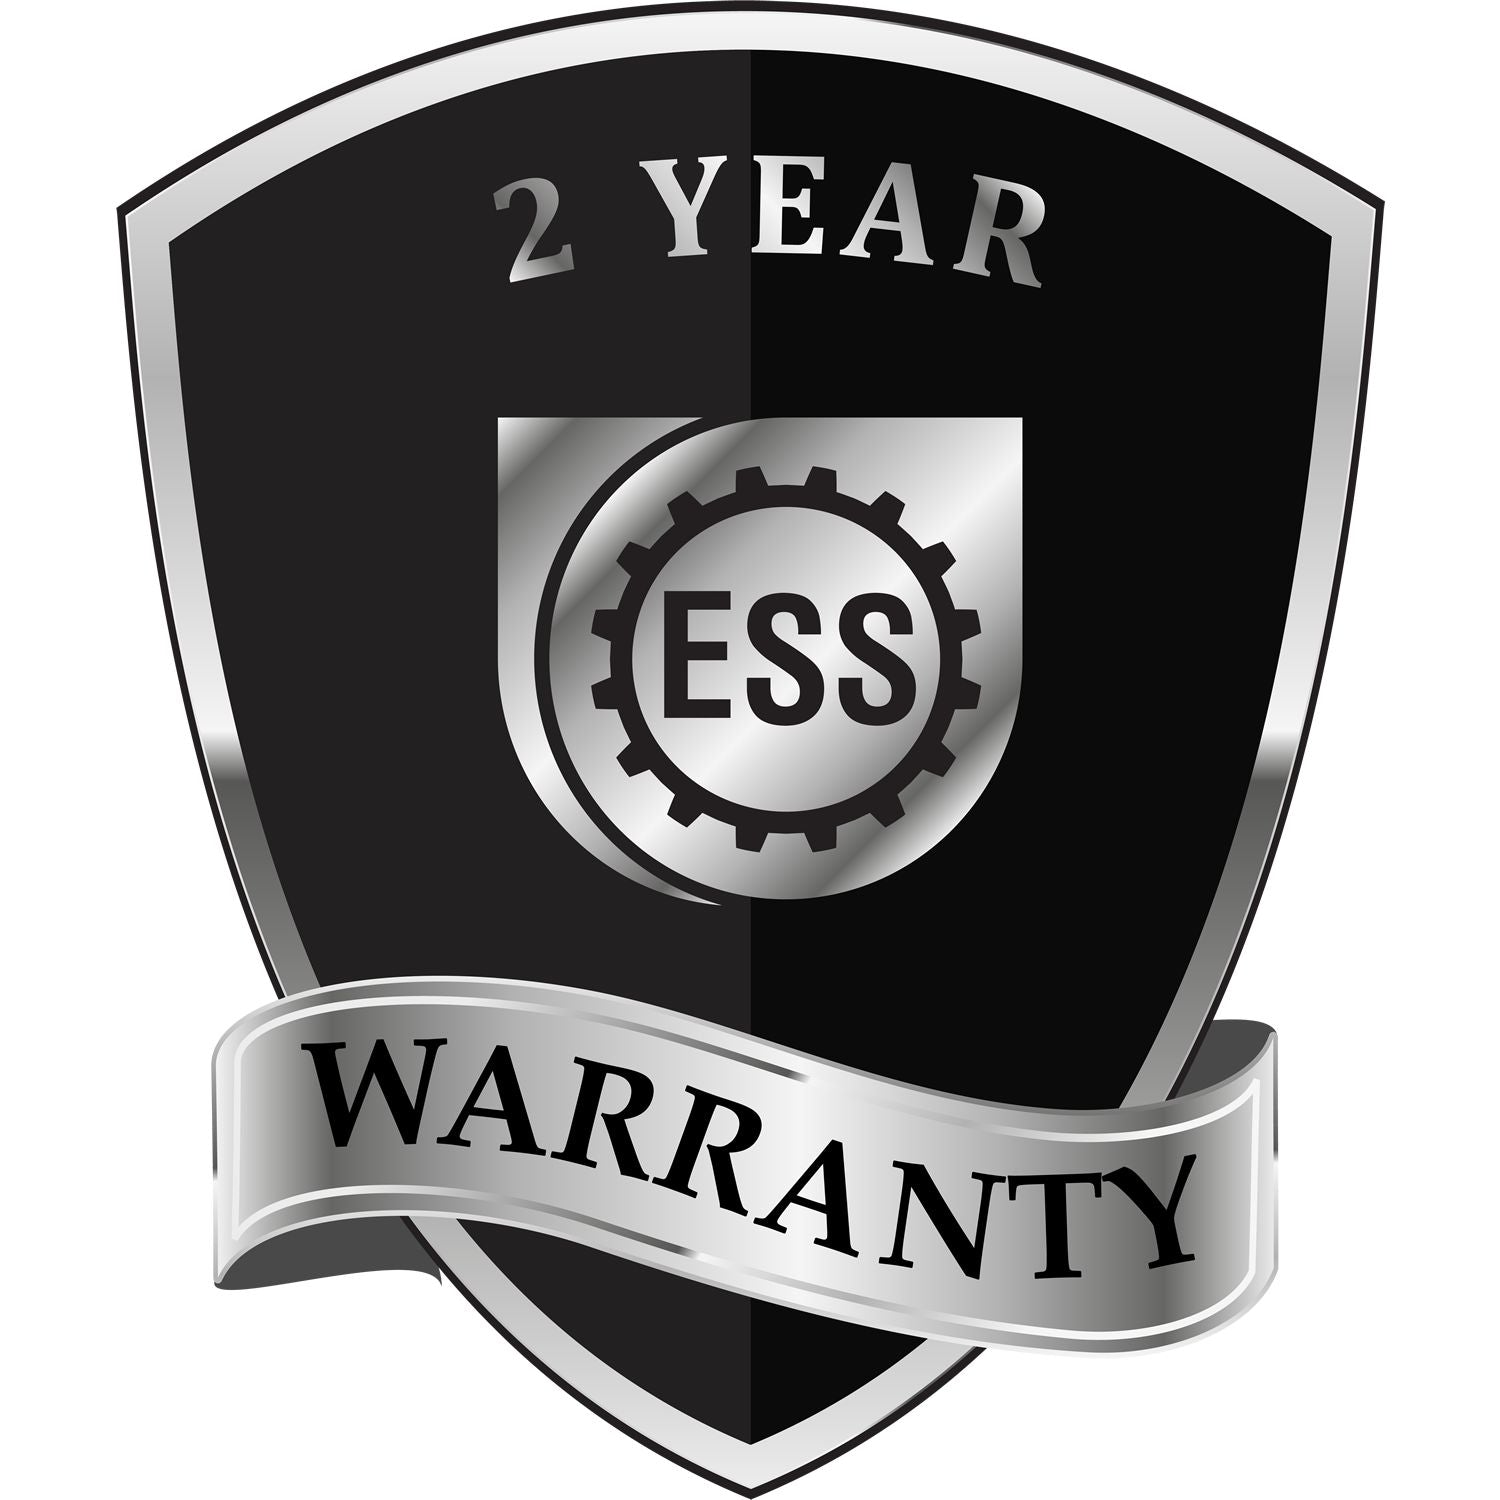 A badge or emblem showing a warranty icon for the Heavy Duty Cast Iron New York Land Surveyor Seal Embosser